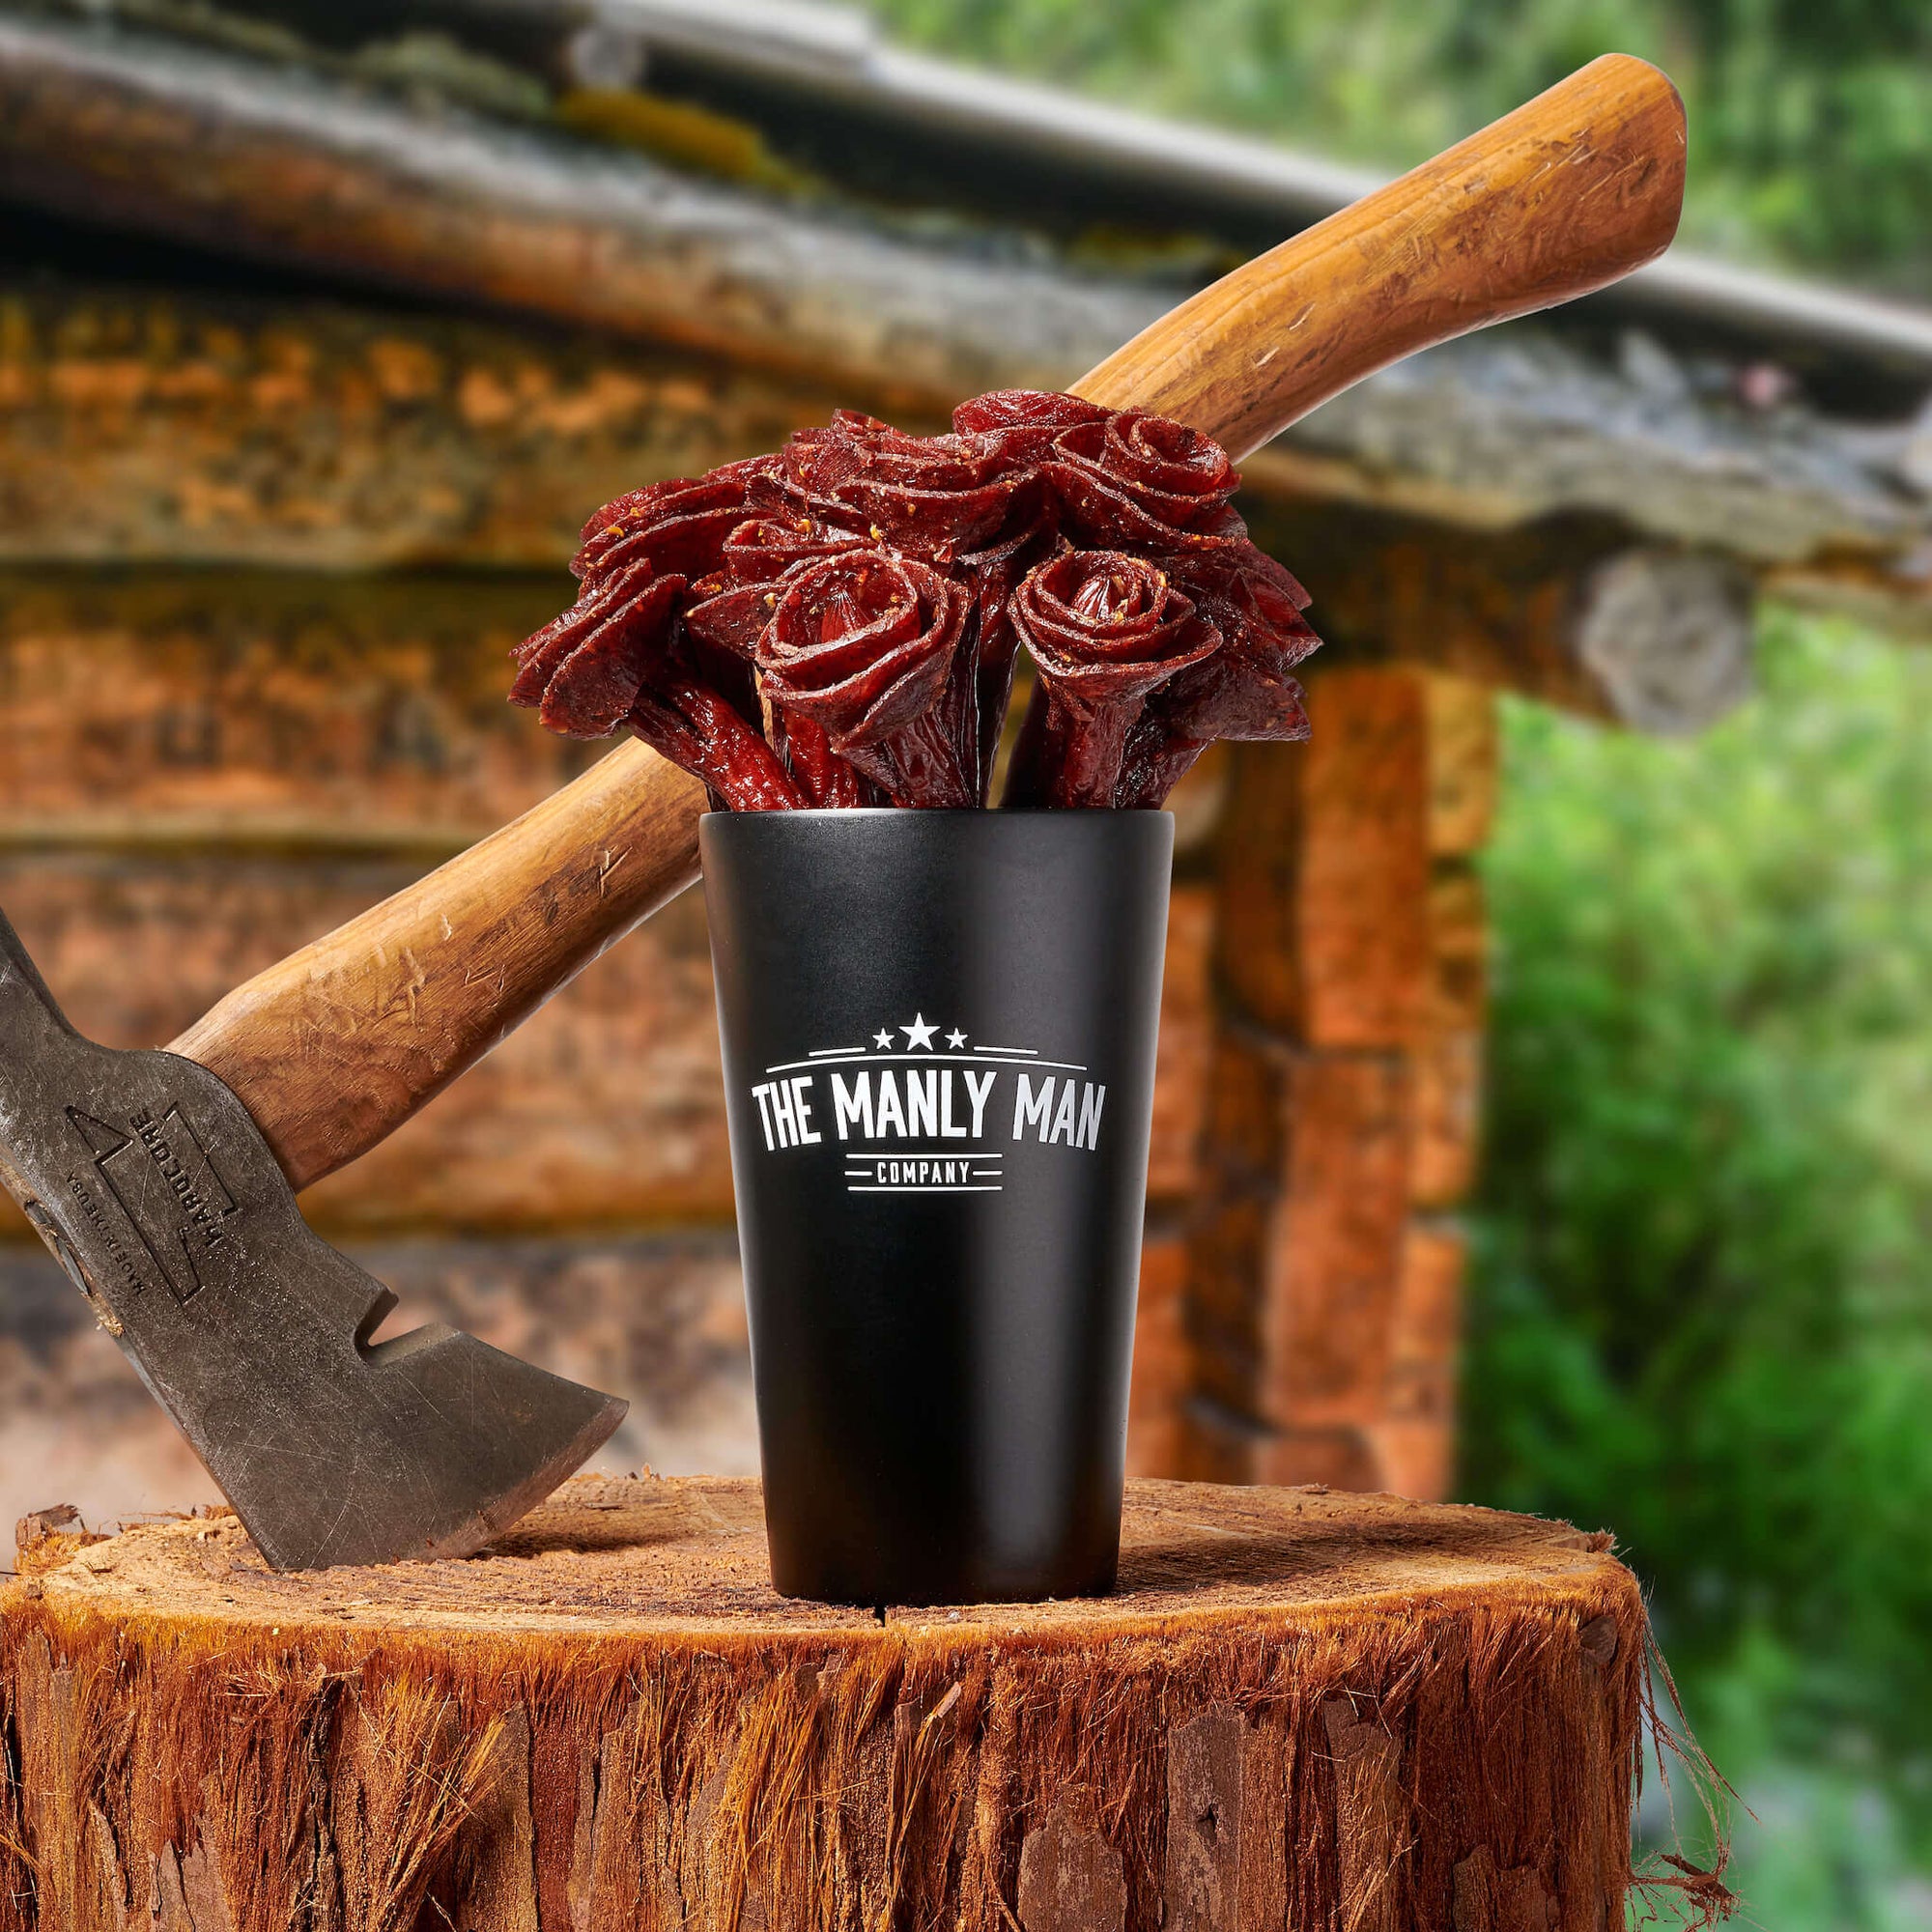 Handmade Manly Man beef jerky rose gift bouquet sitting on log with a hatchet